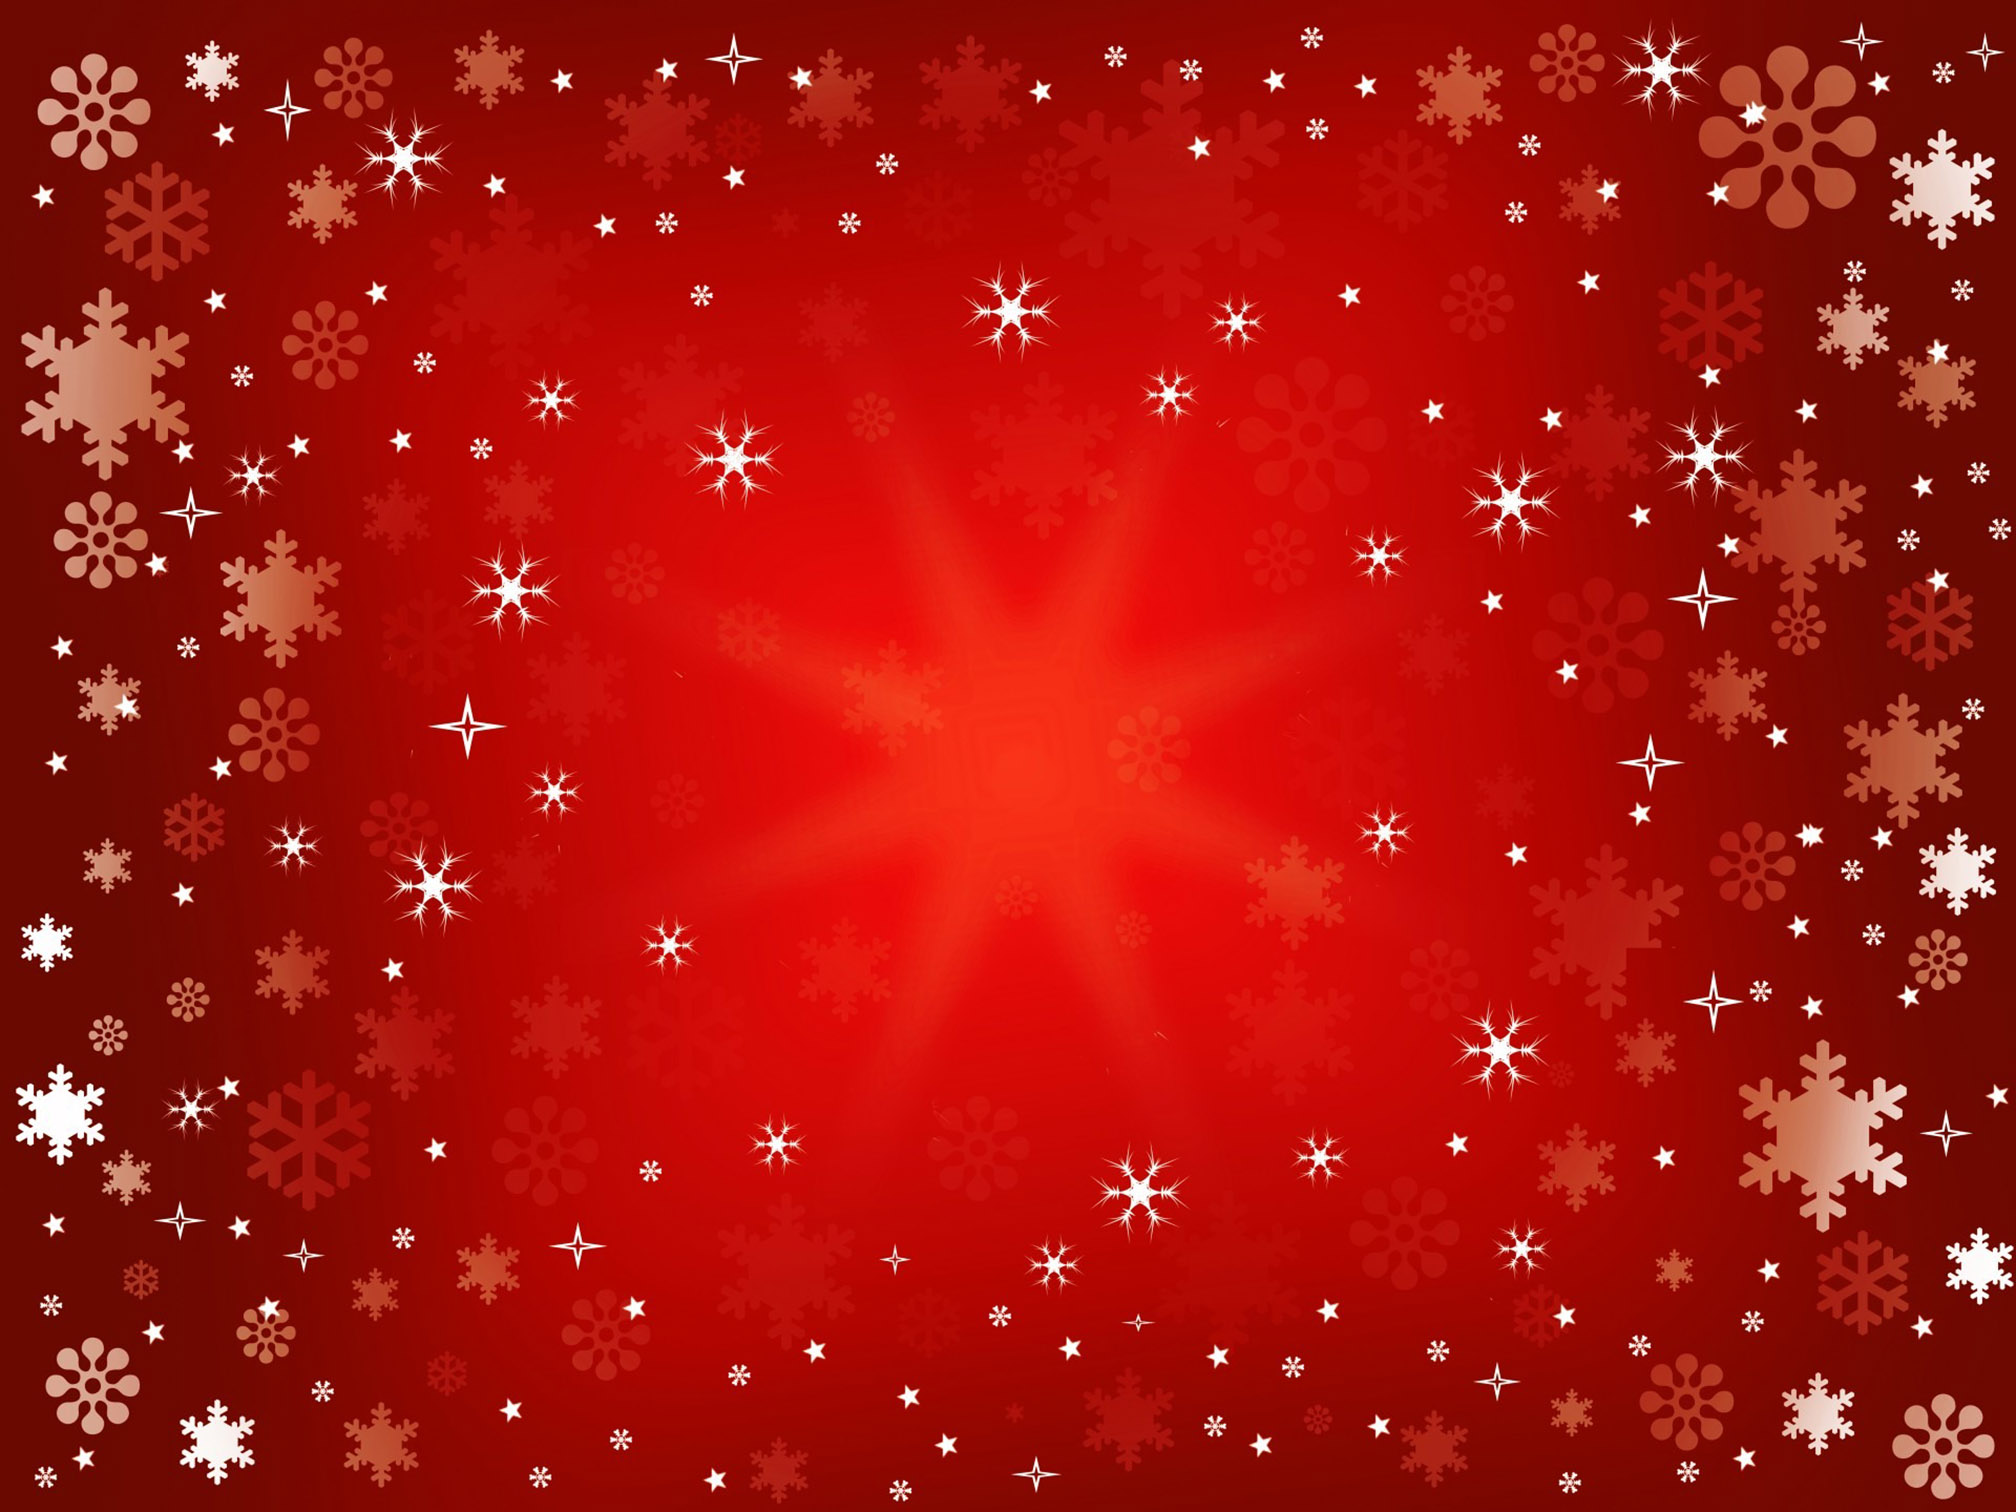 35 Stars at Xmas Background Images Cards or Christmas